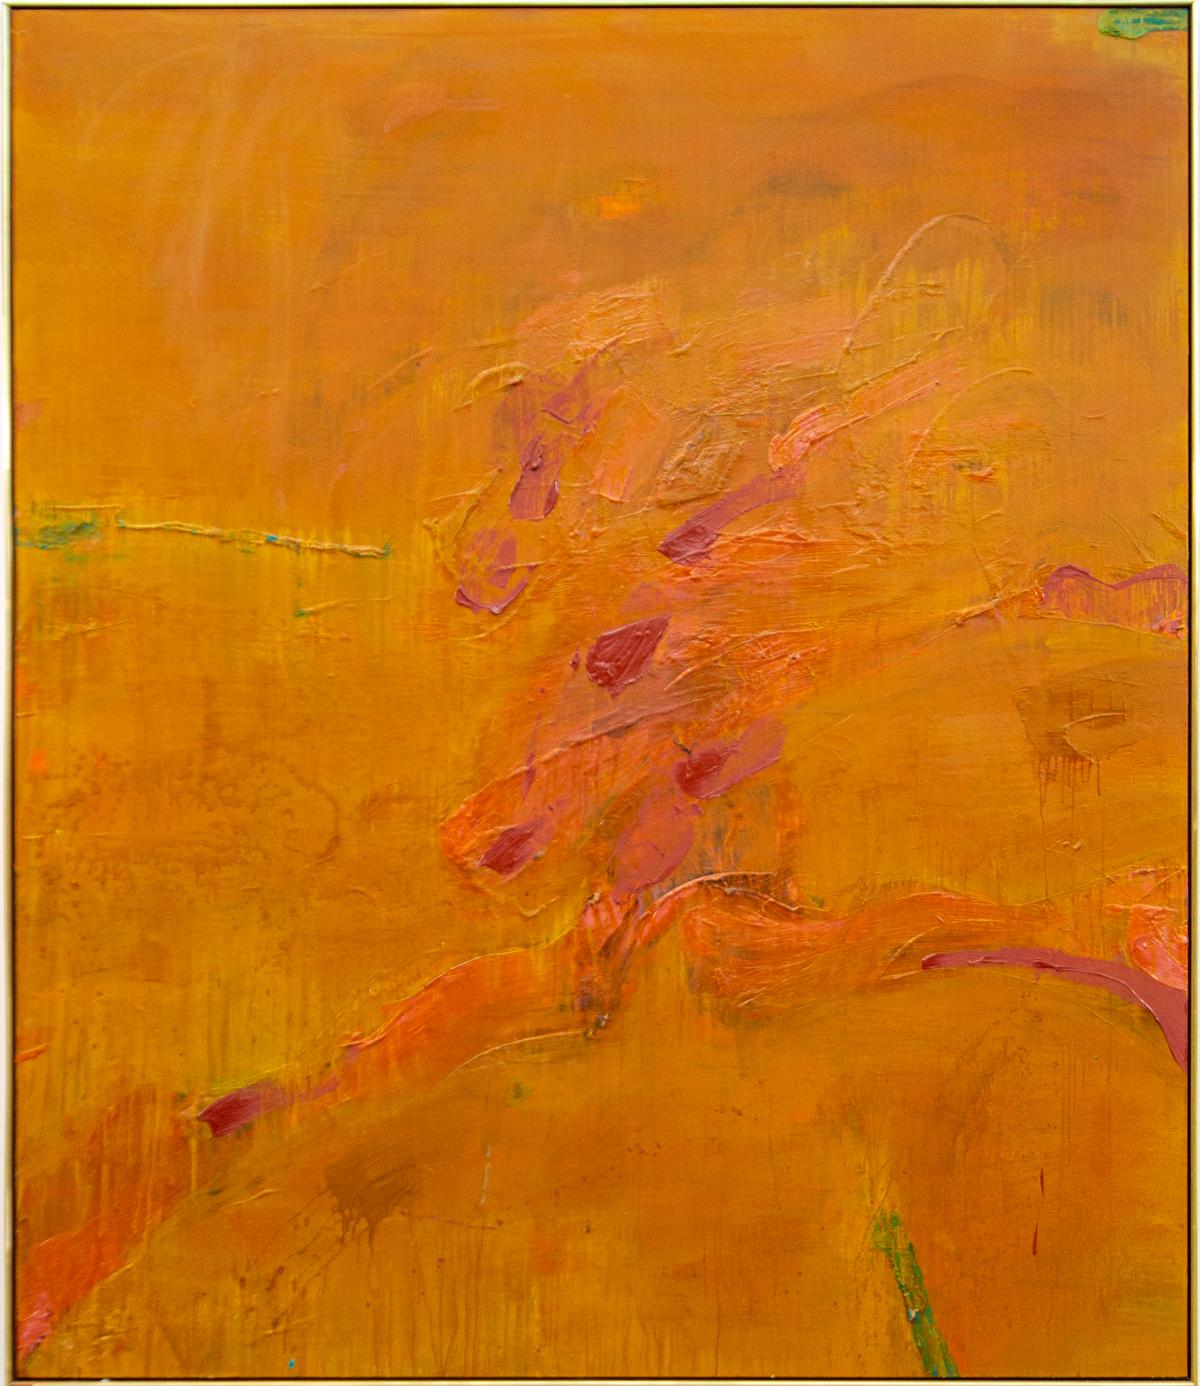 Abstract Painting Graham Coughtry - Grand Rajasthan - abstrait, audacieux, gestuel, expressionniste, acrylique sur toile